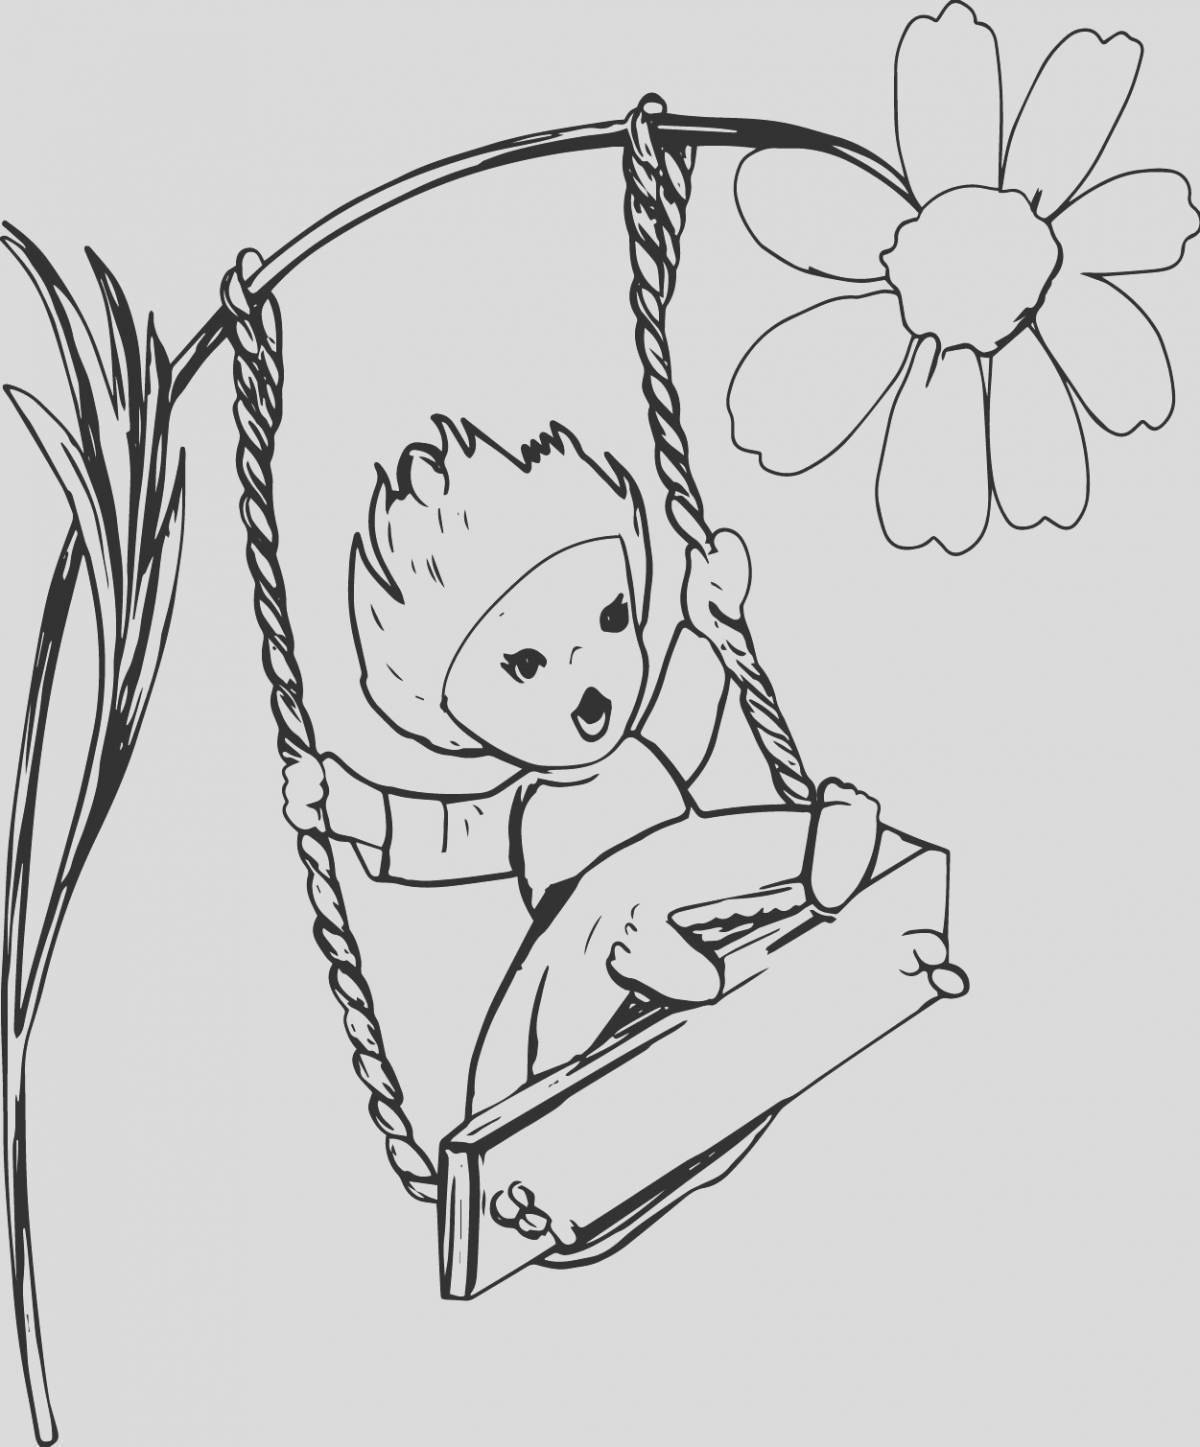 Coloring page cheerful girl on a swing